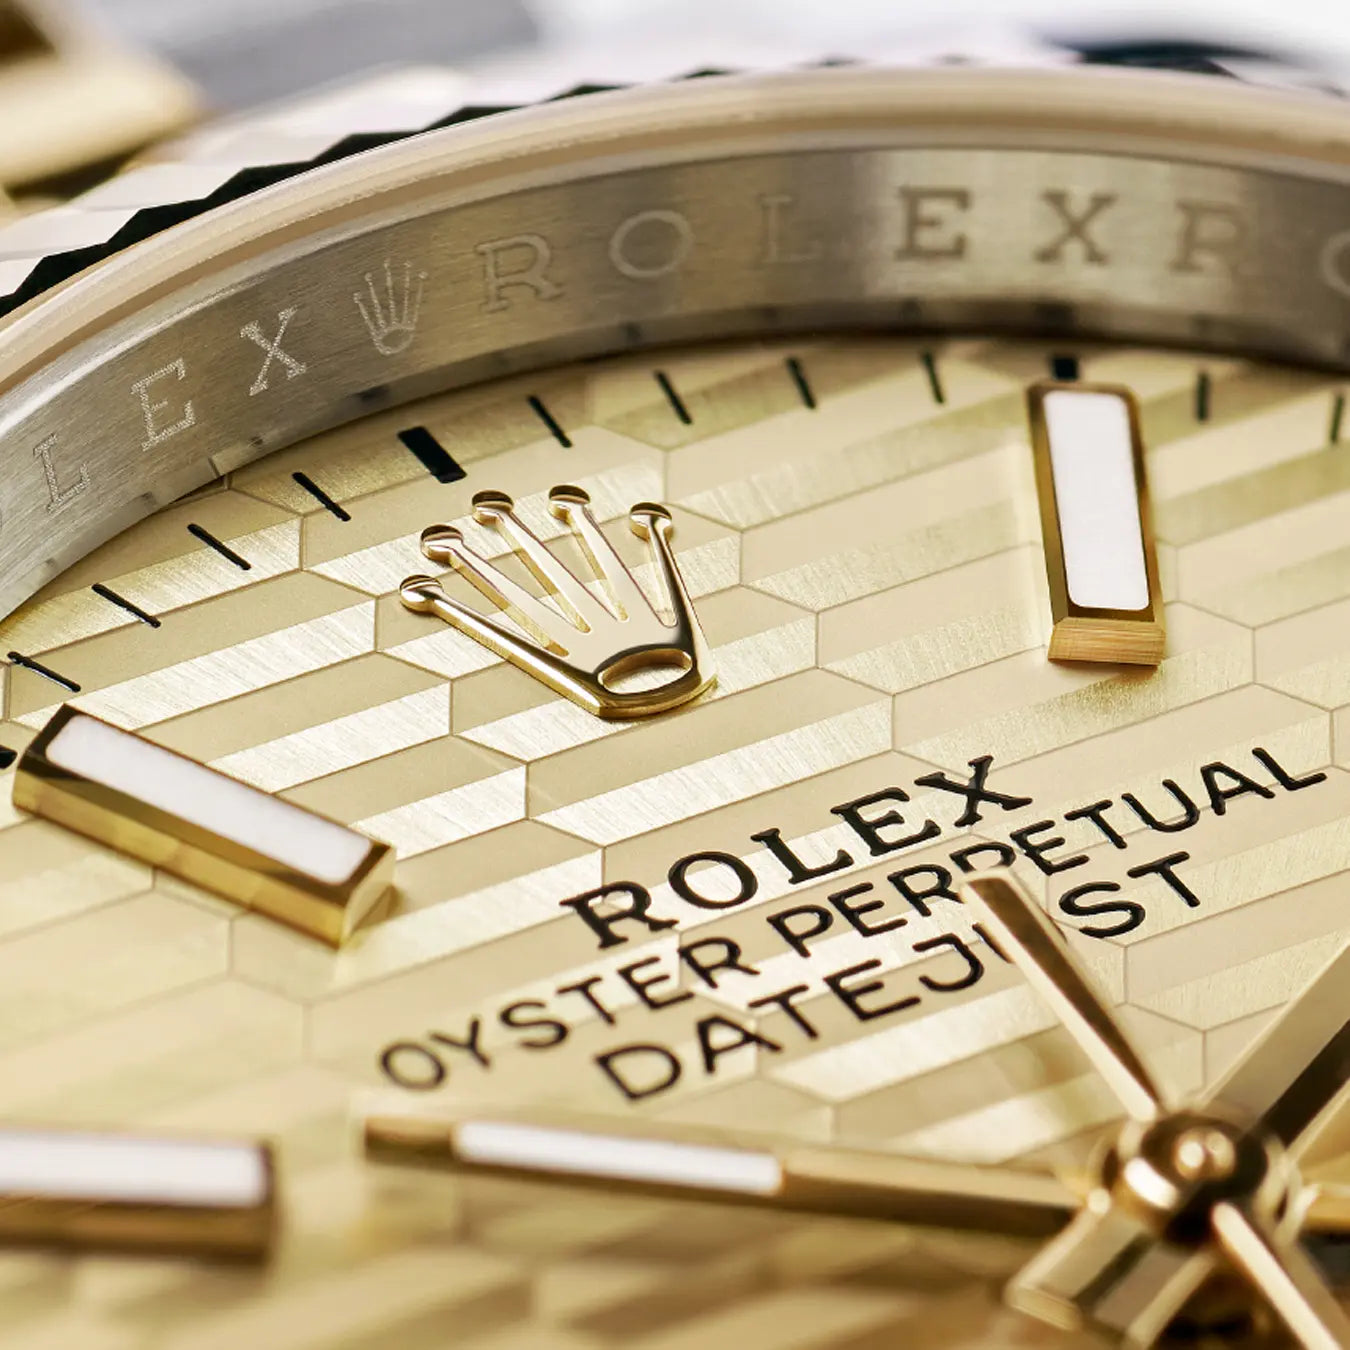 A Voyage into the World of Rolex | Howard Fine Jewellers - Official Rolex Retailer